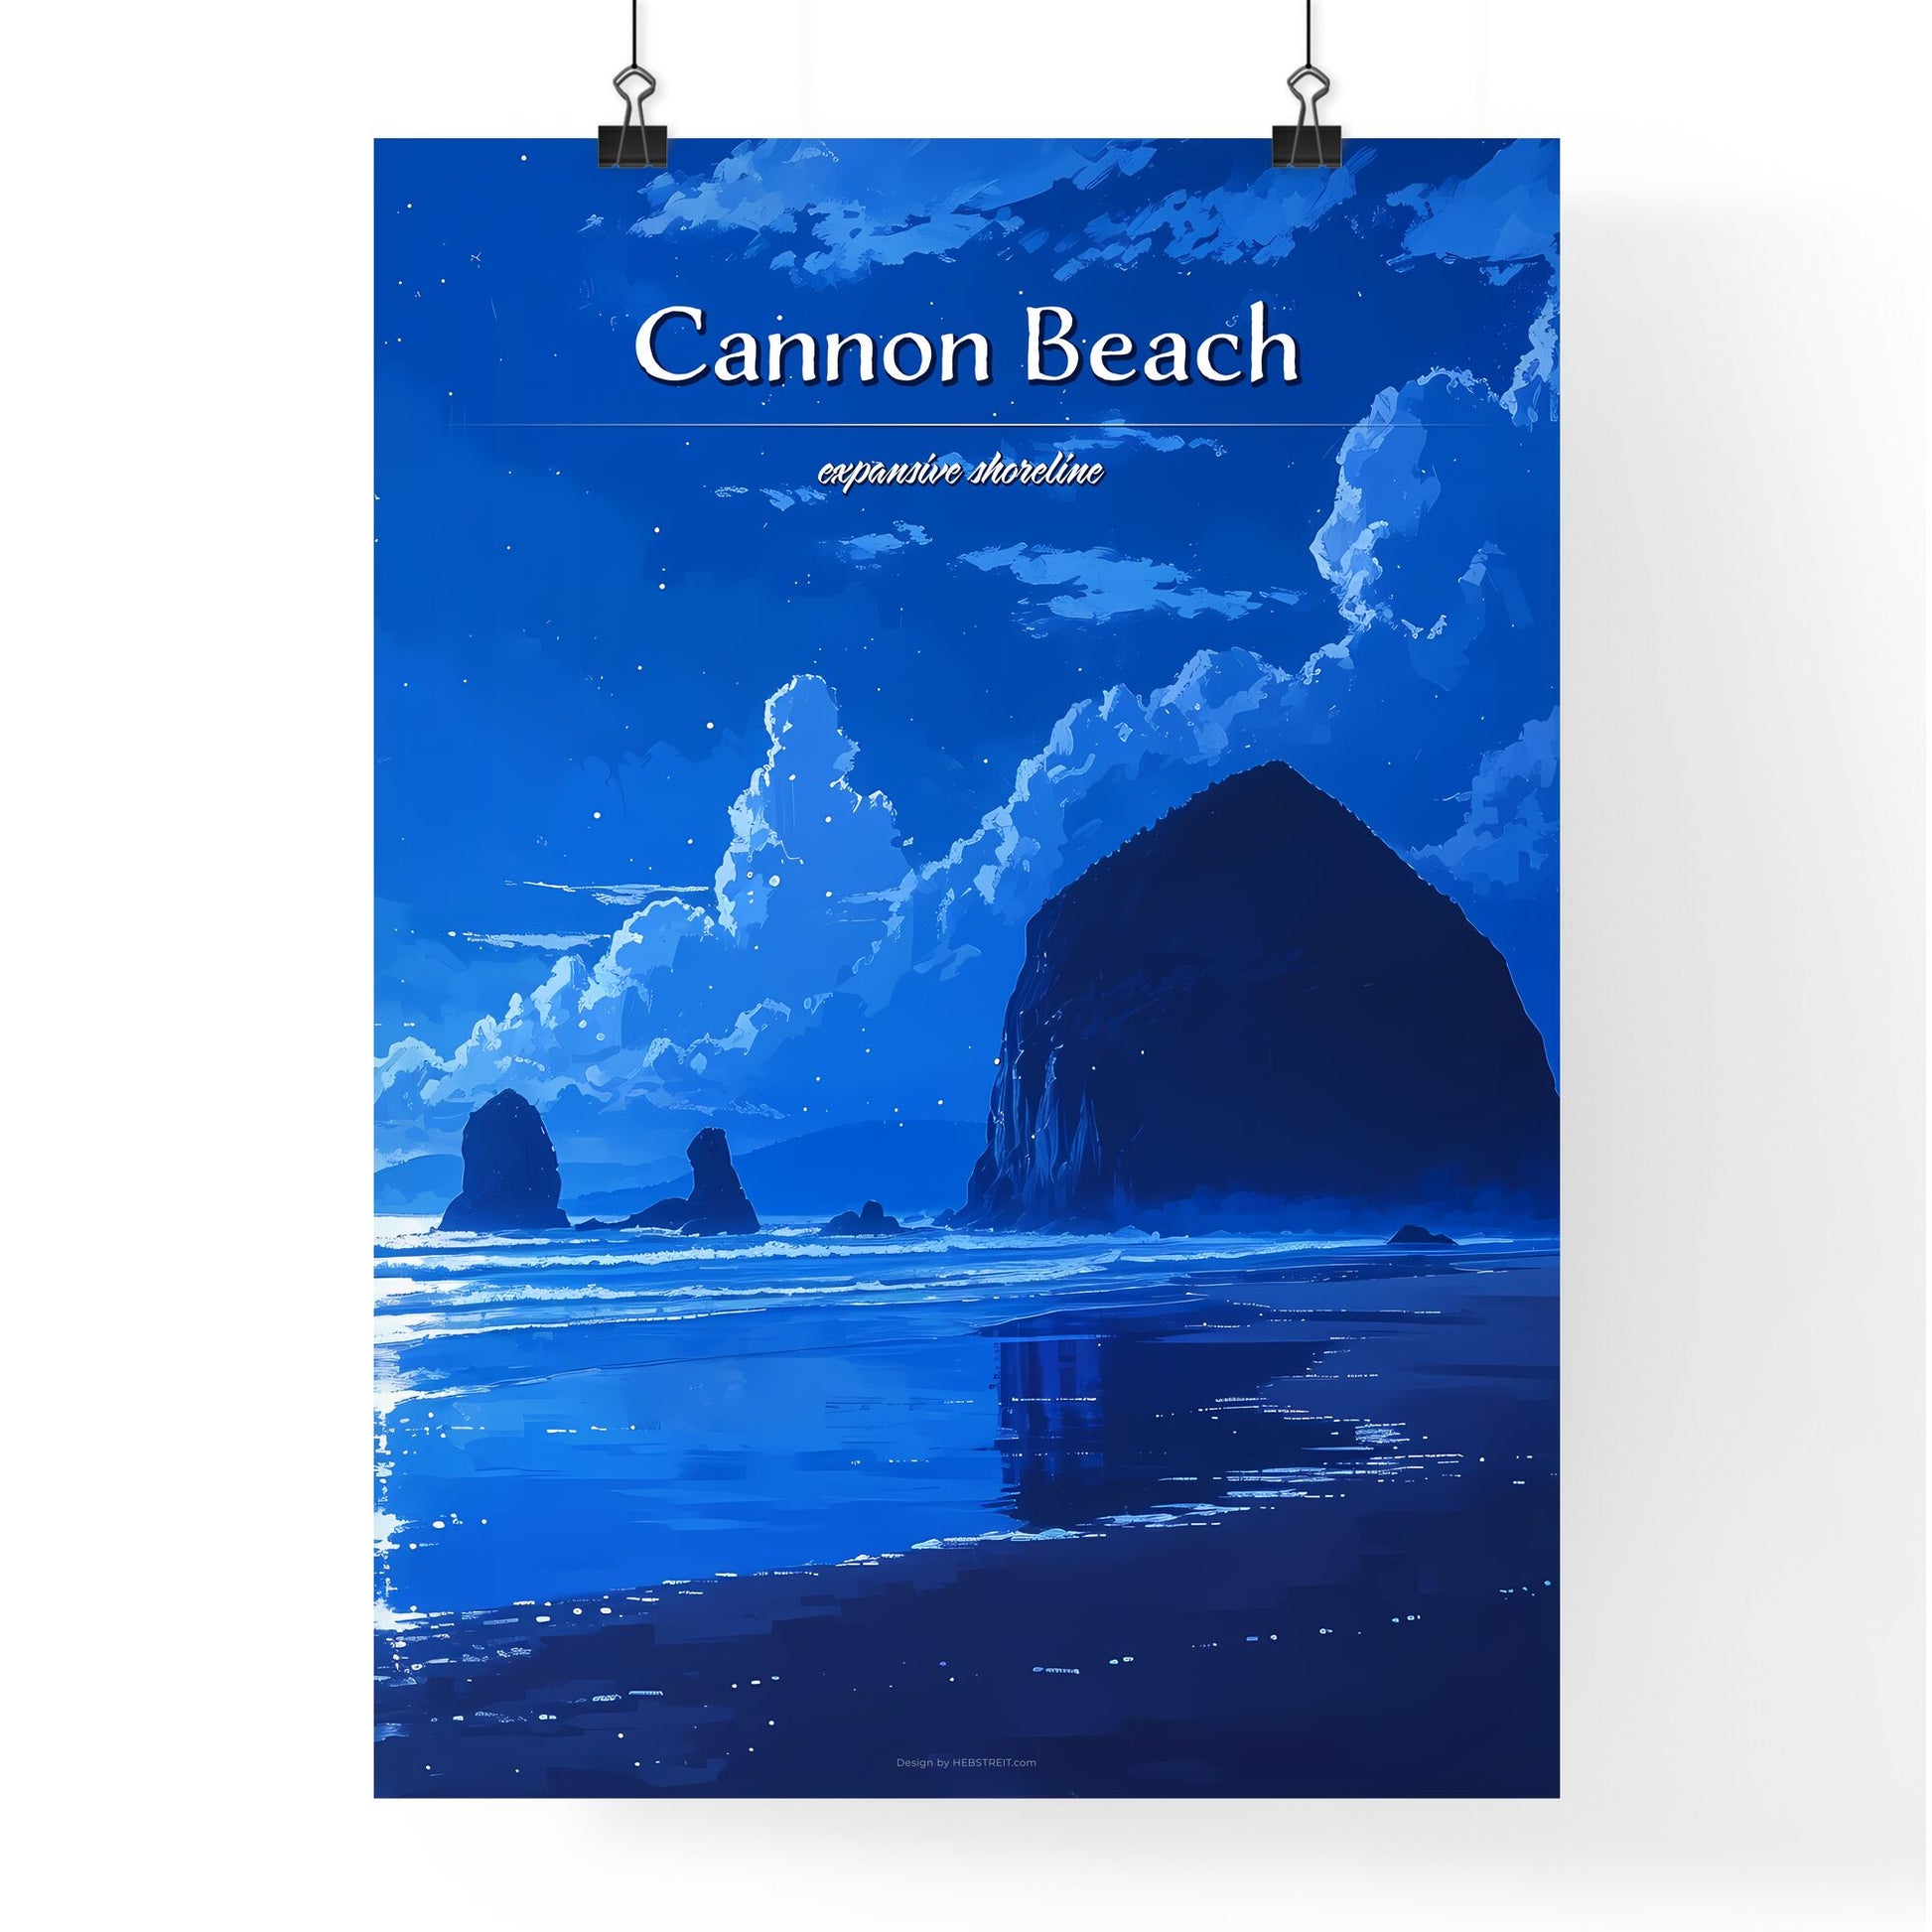 Cannon Beach - Art print of a large rock formation on a beach Default Title